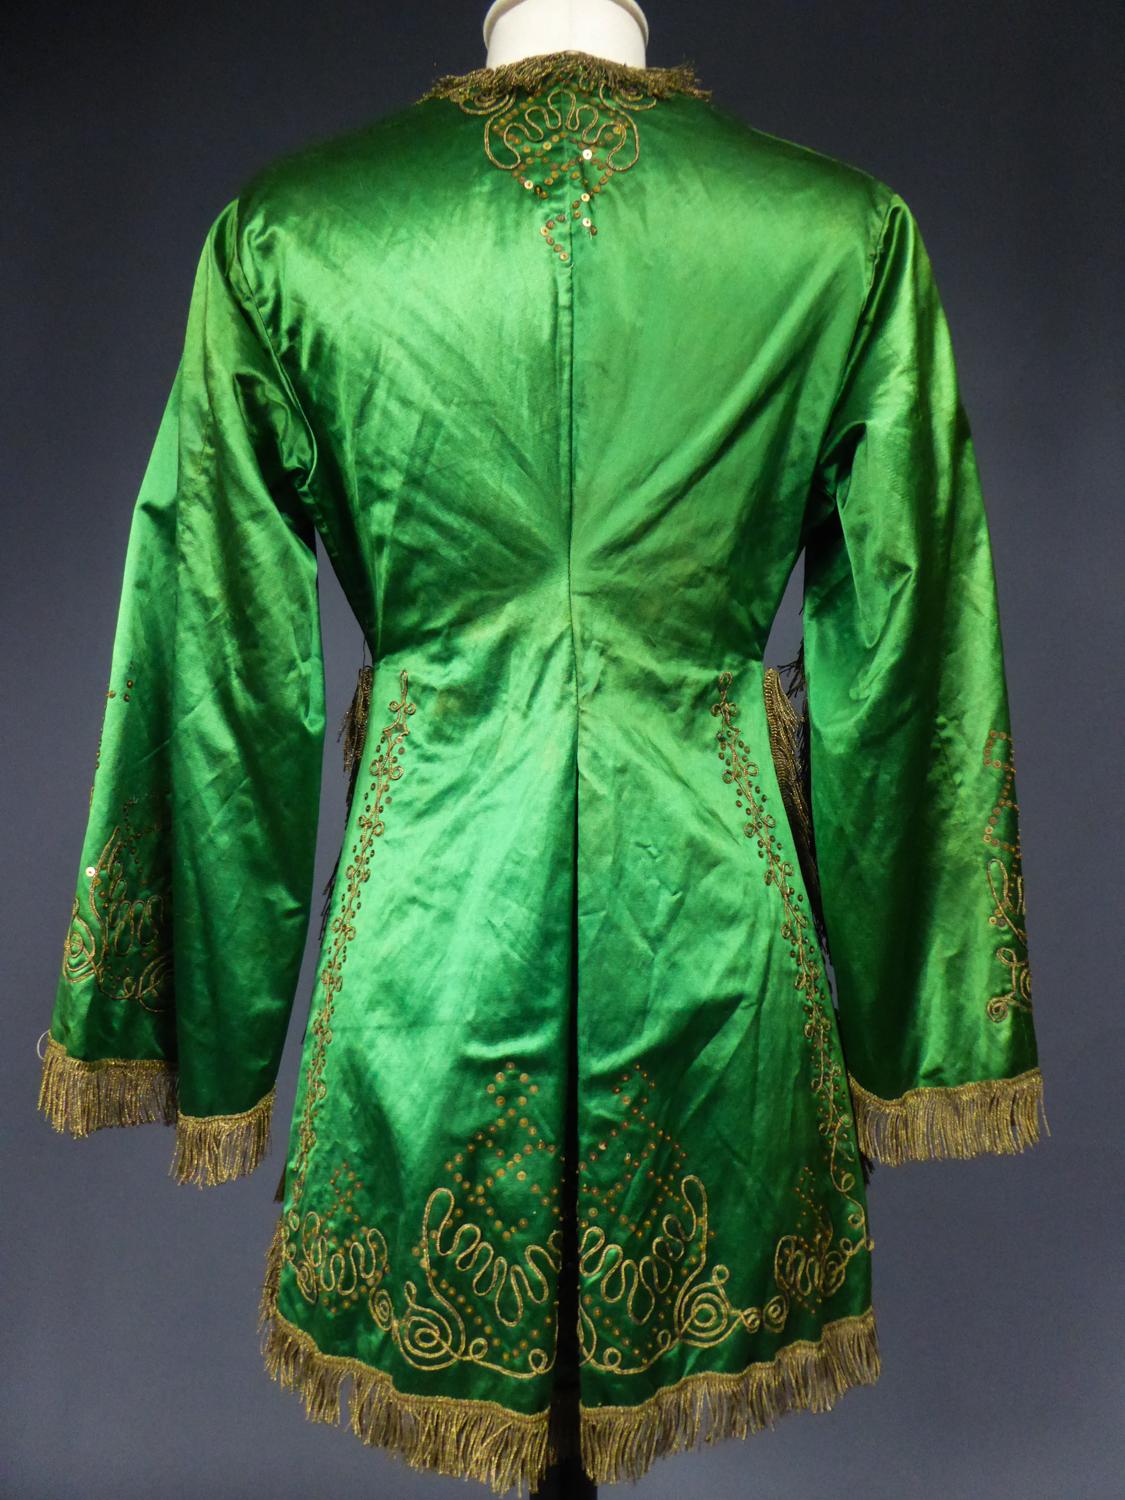 Orientalist Evening Fancy Jacket in Embroidered Sequin and Silk Satin Circa 1940 For Sale 5